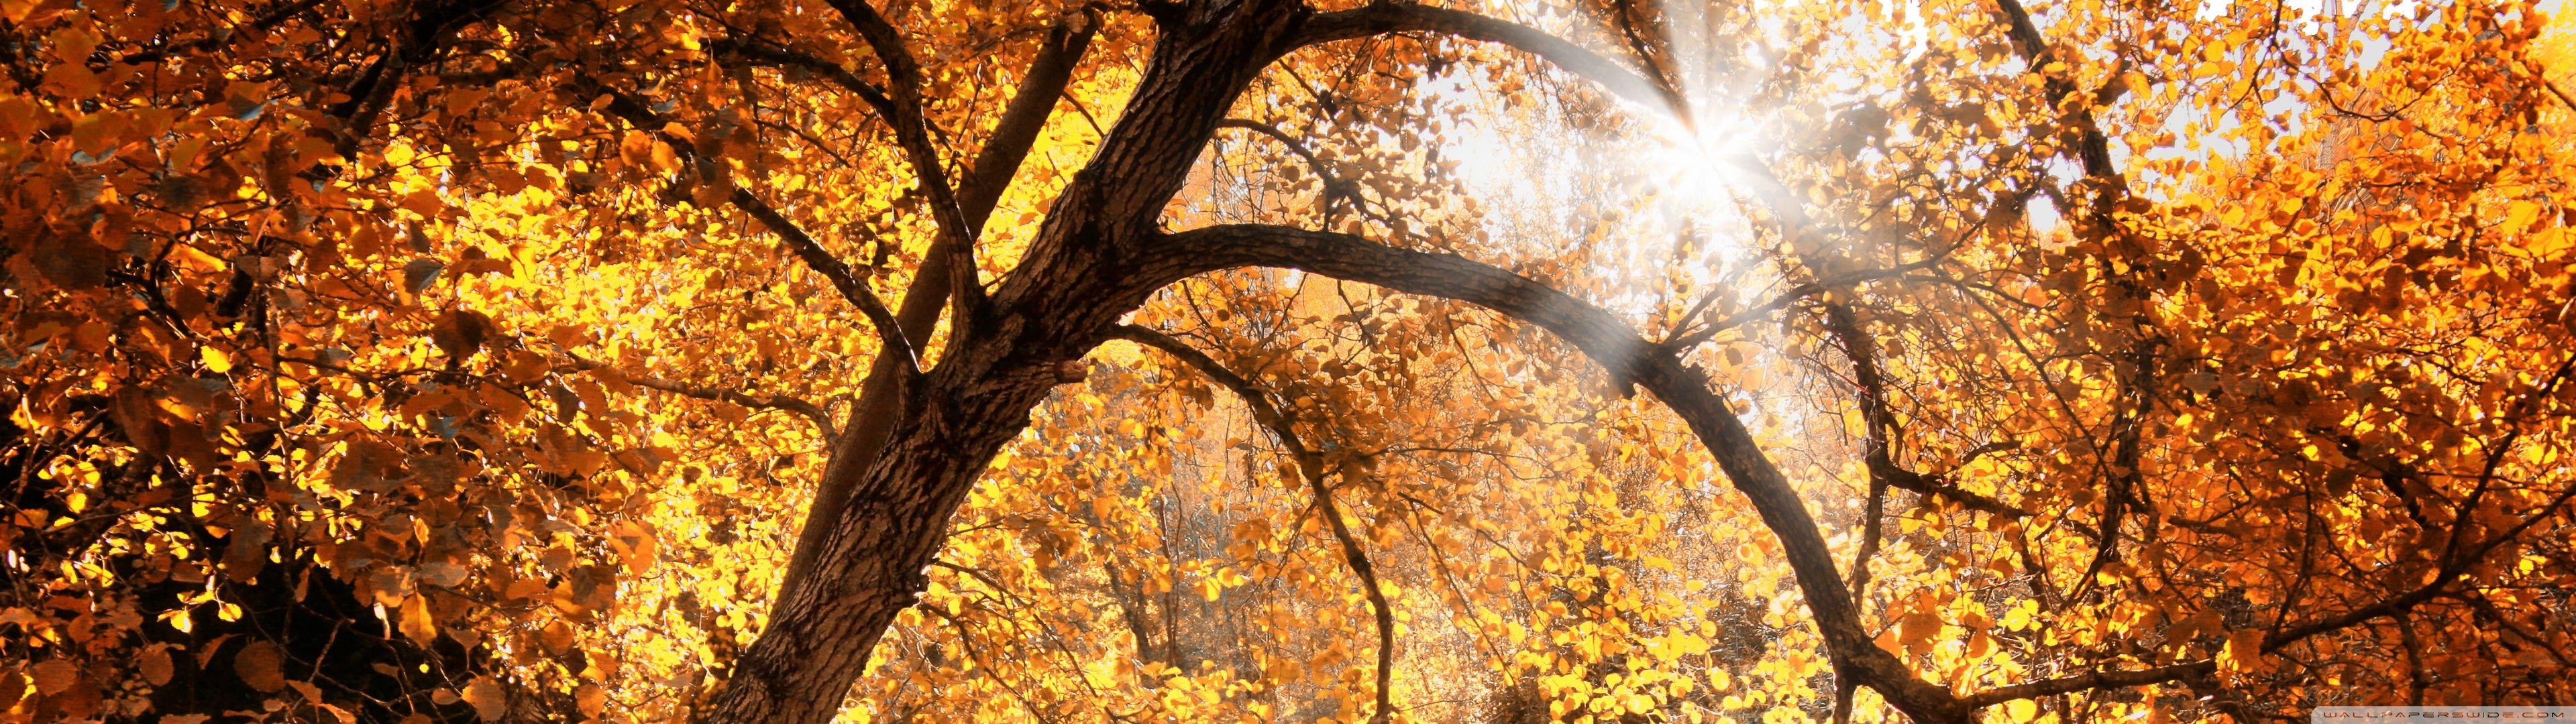 Dual Monitor Autumn Wallpapers - Top Free Dual Monitor Autumn